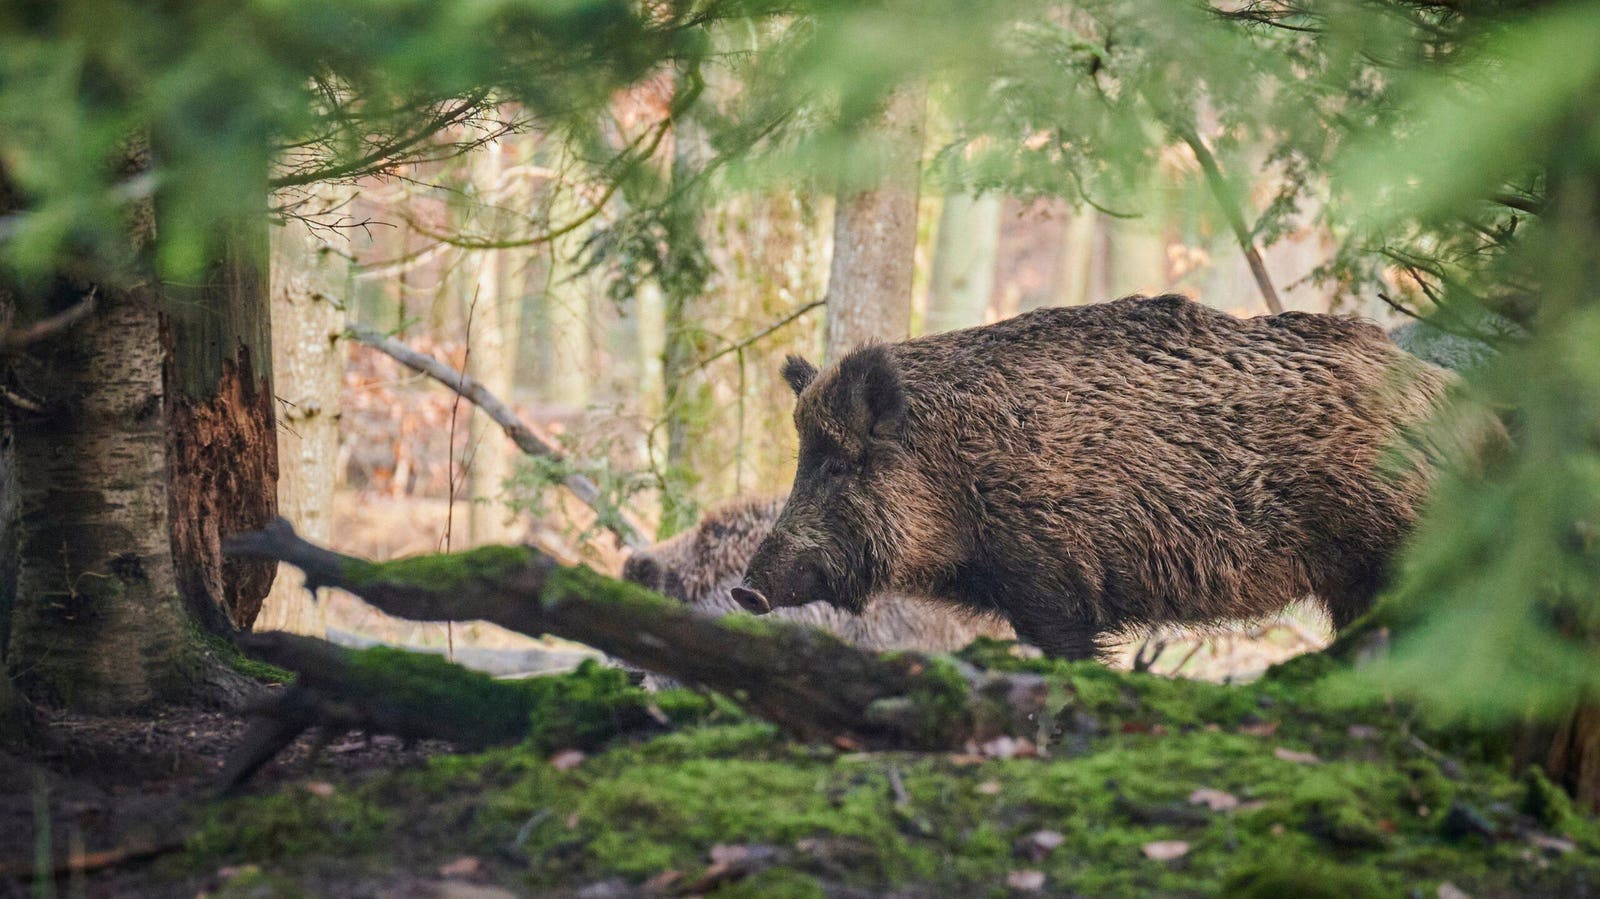 Wild Boar Has Five Times More Toxic PFAS Than Humans Allowed To Eat